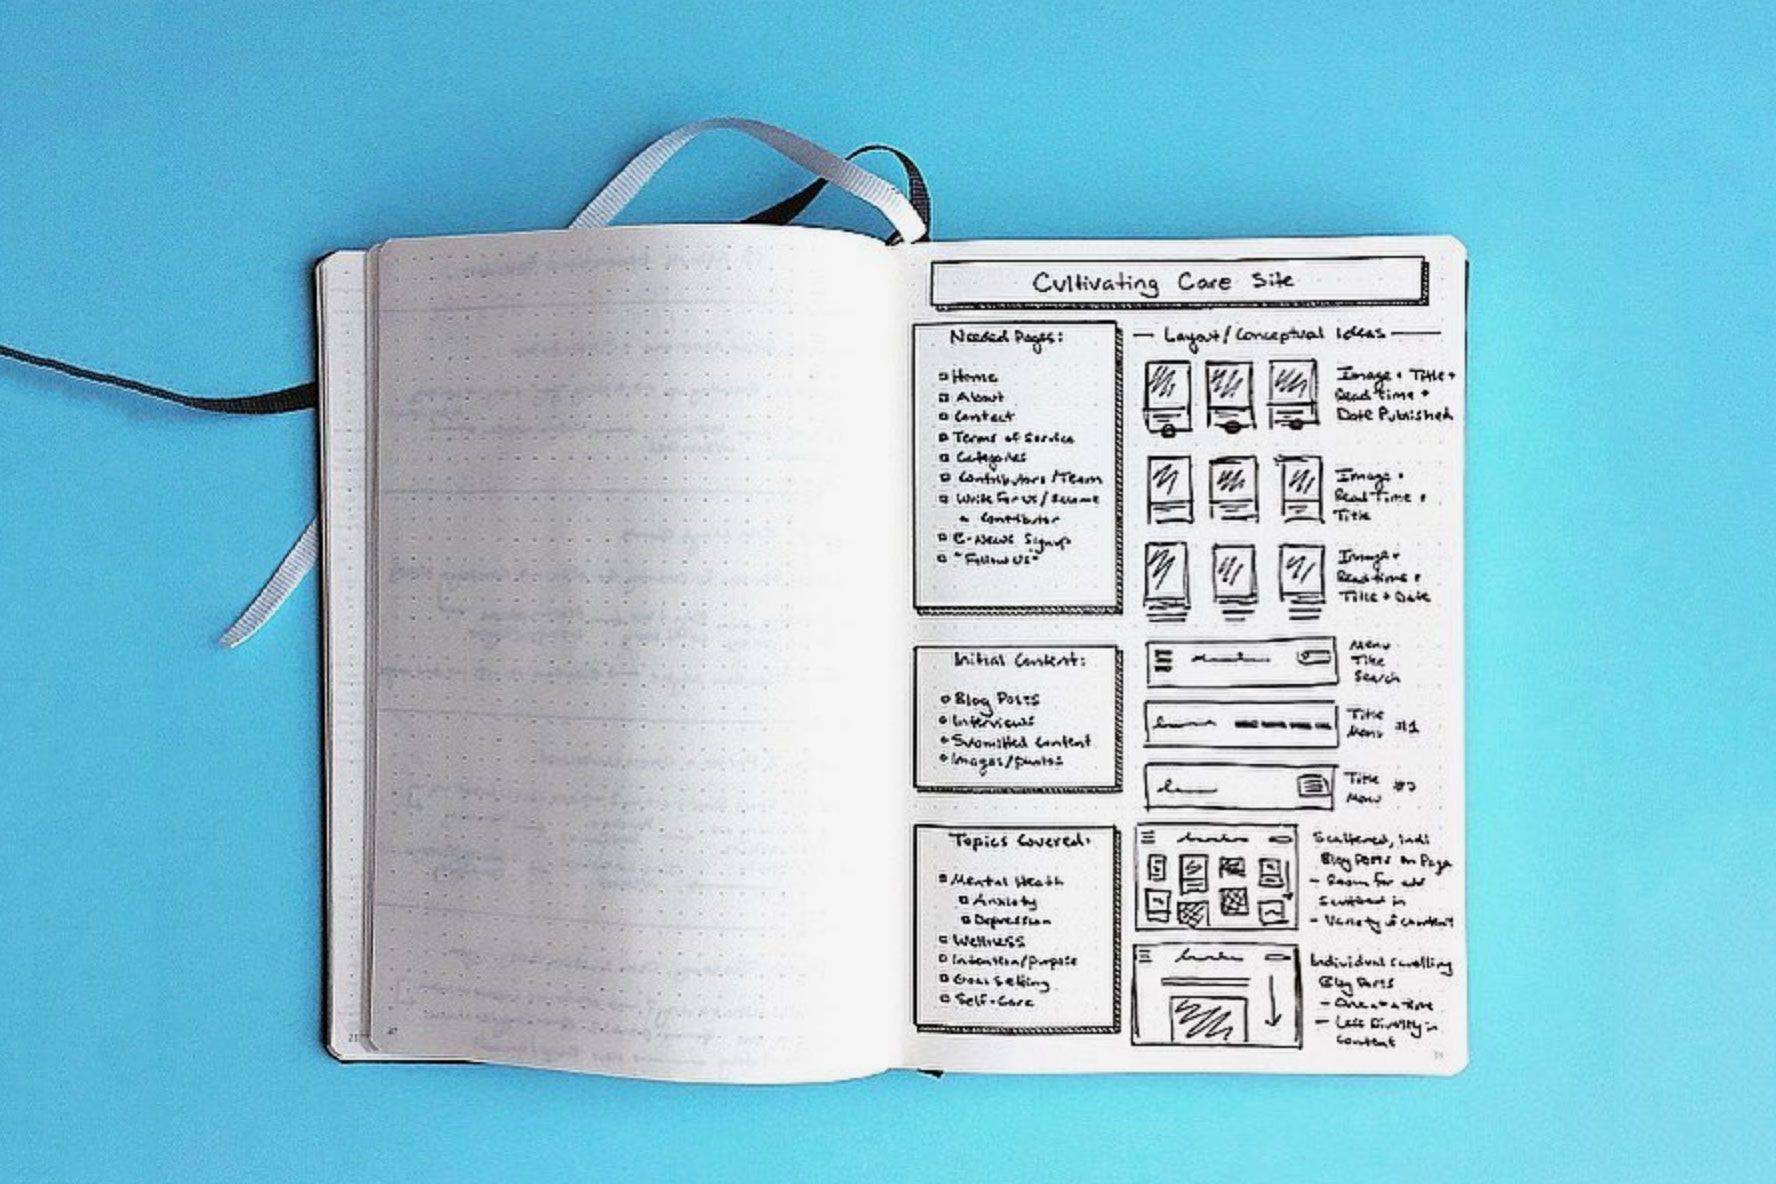 Where to Buy Bullet Journal Supplies - Rae's Daily Page